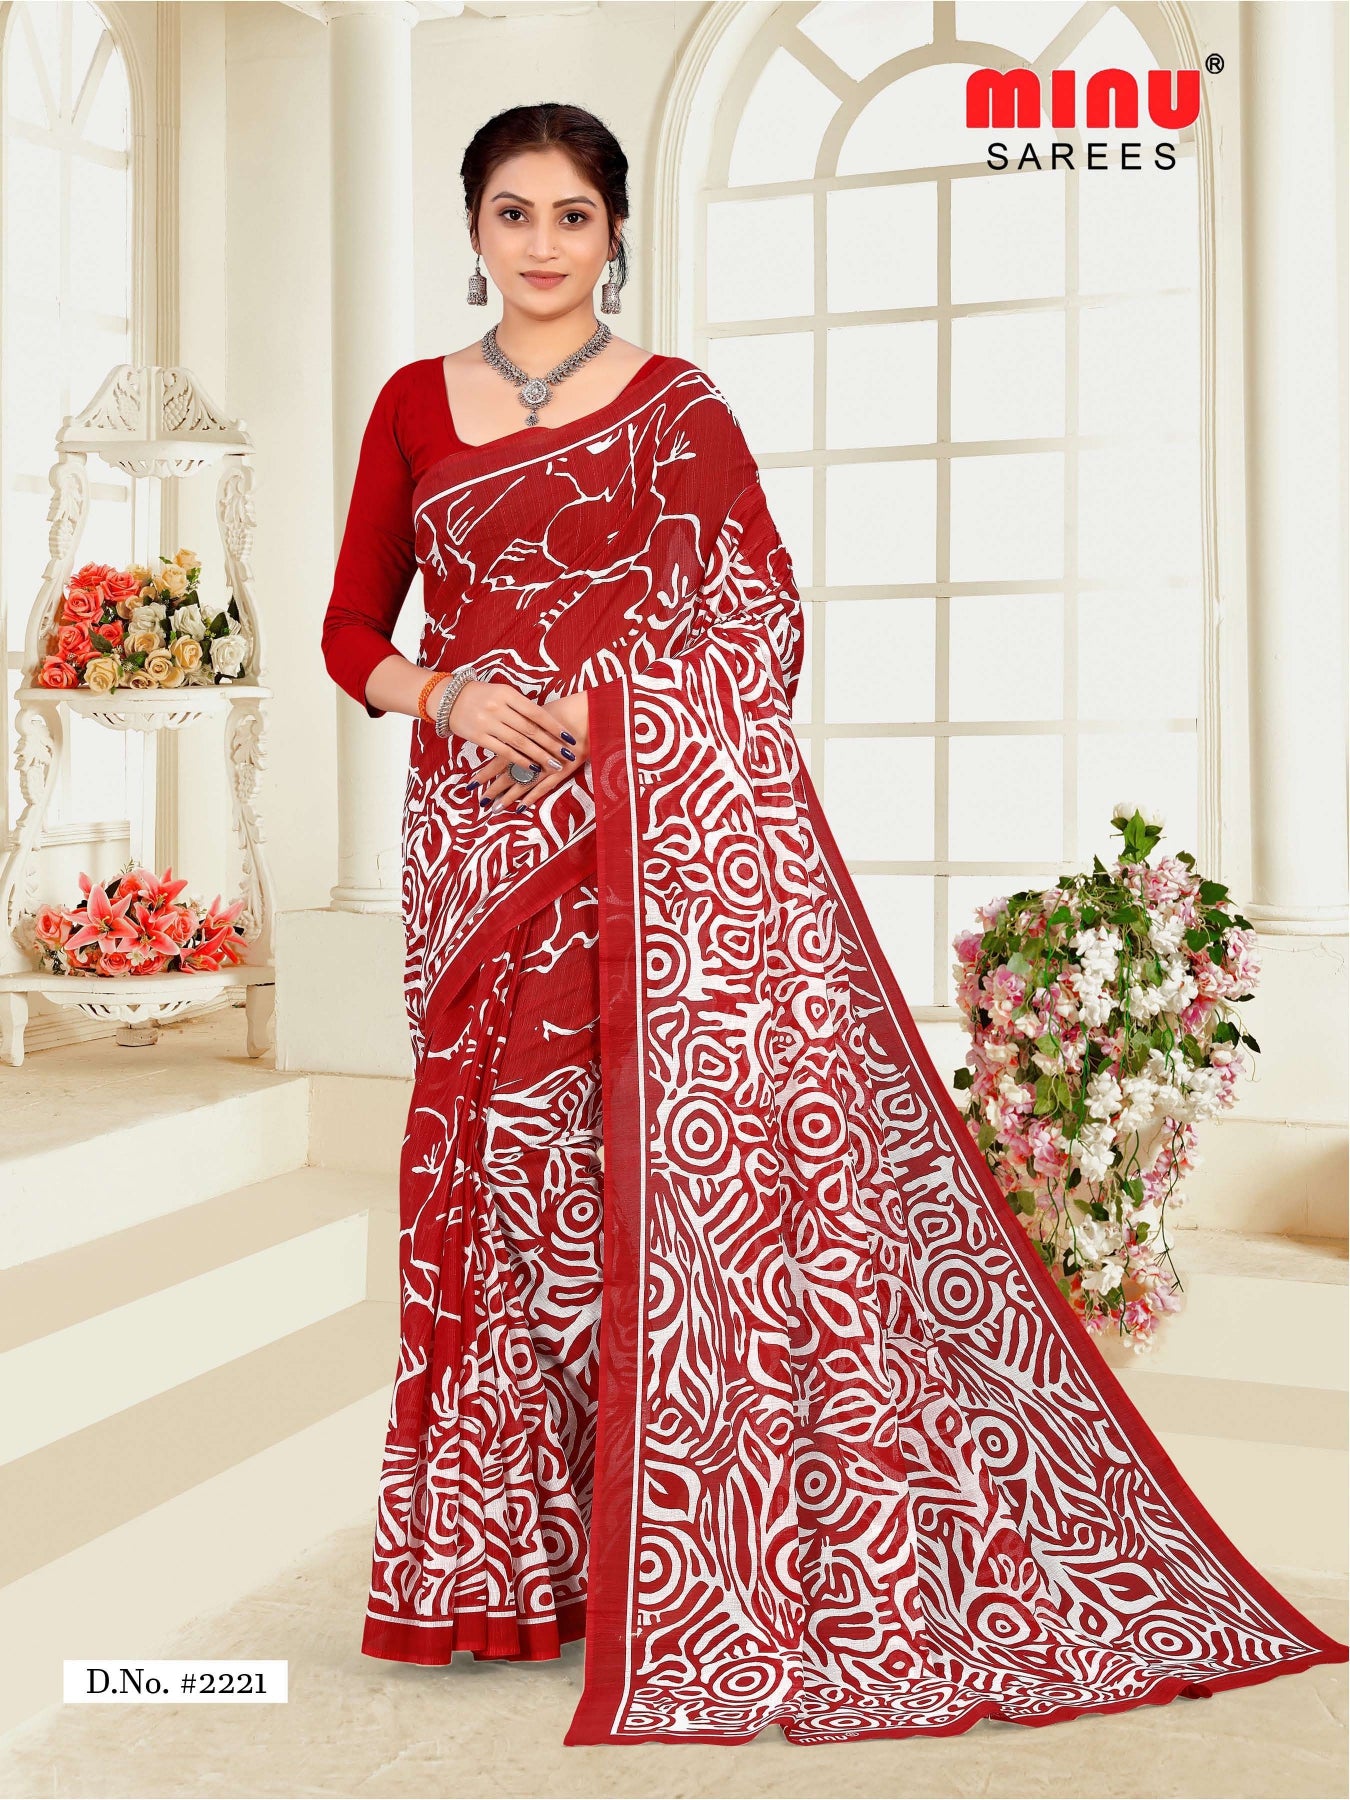 Printed sarees for sale